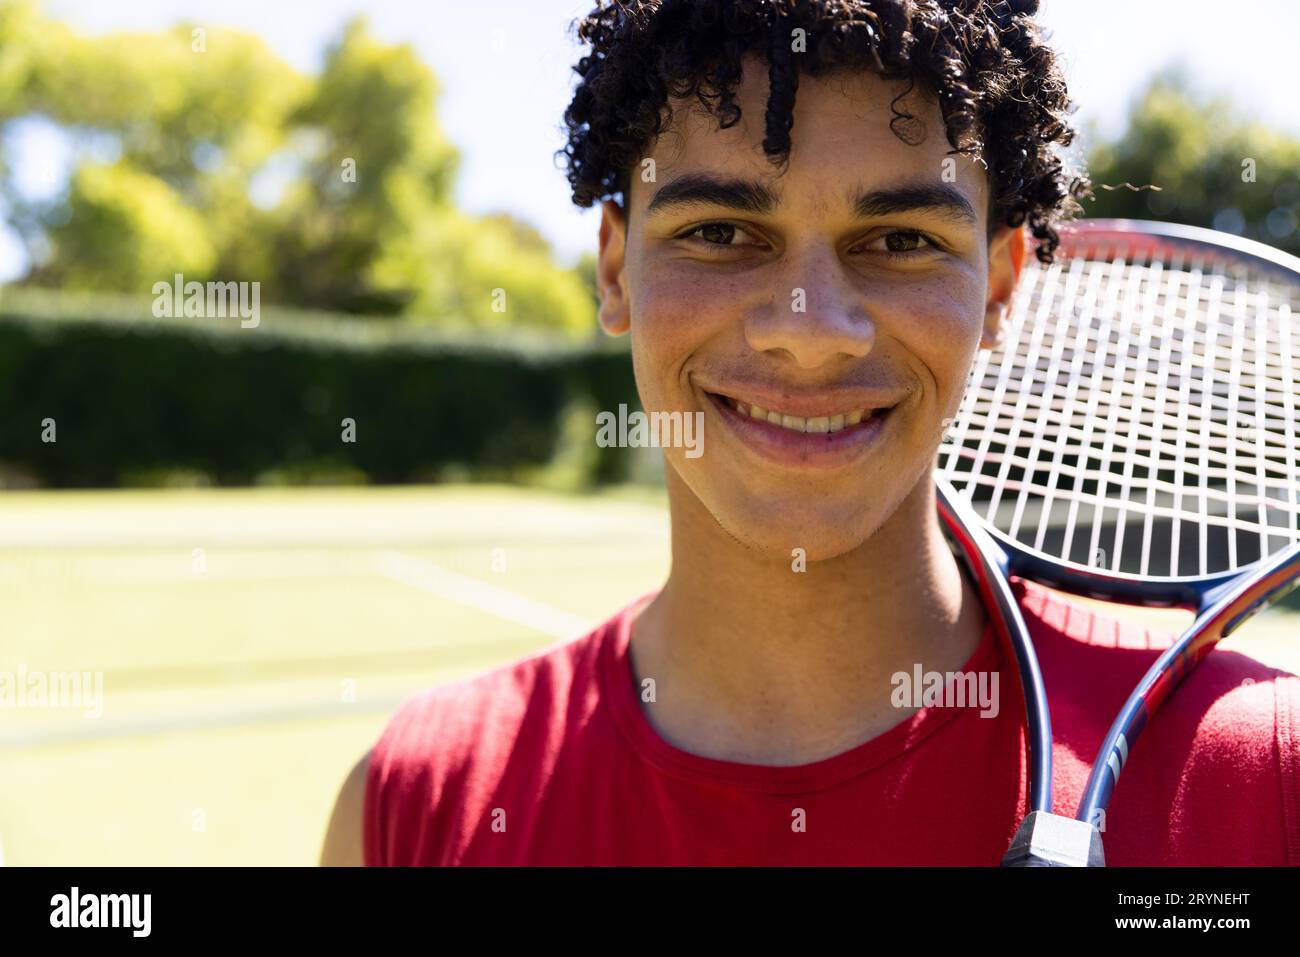 Close-up of biracial young man with tennis racket smiling in tennis court and looking at camera Stock Photo